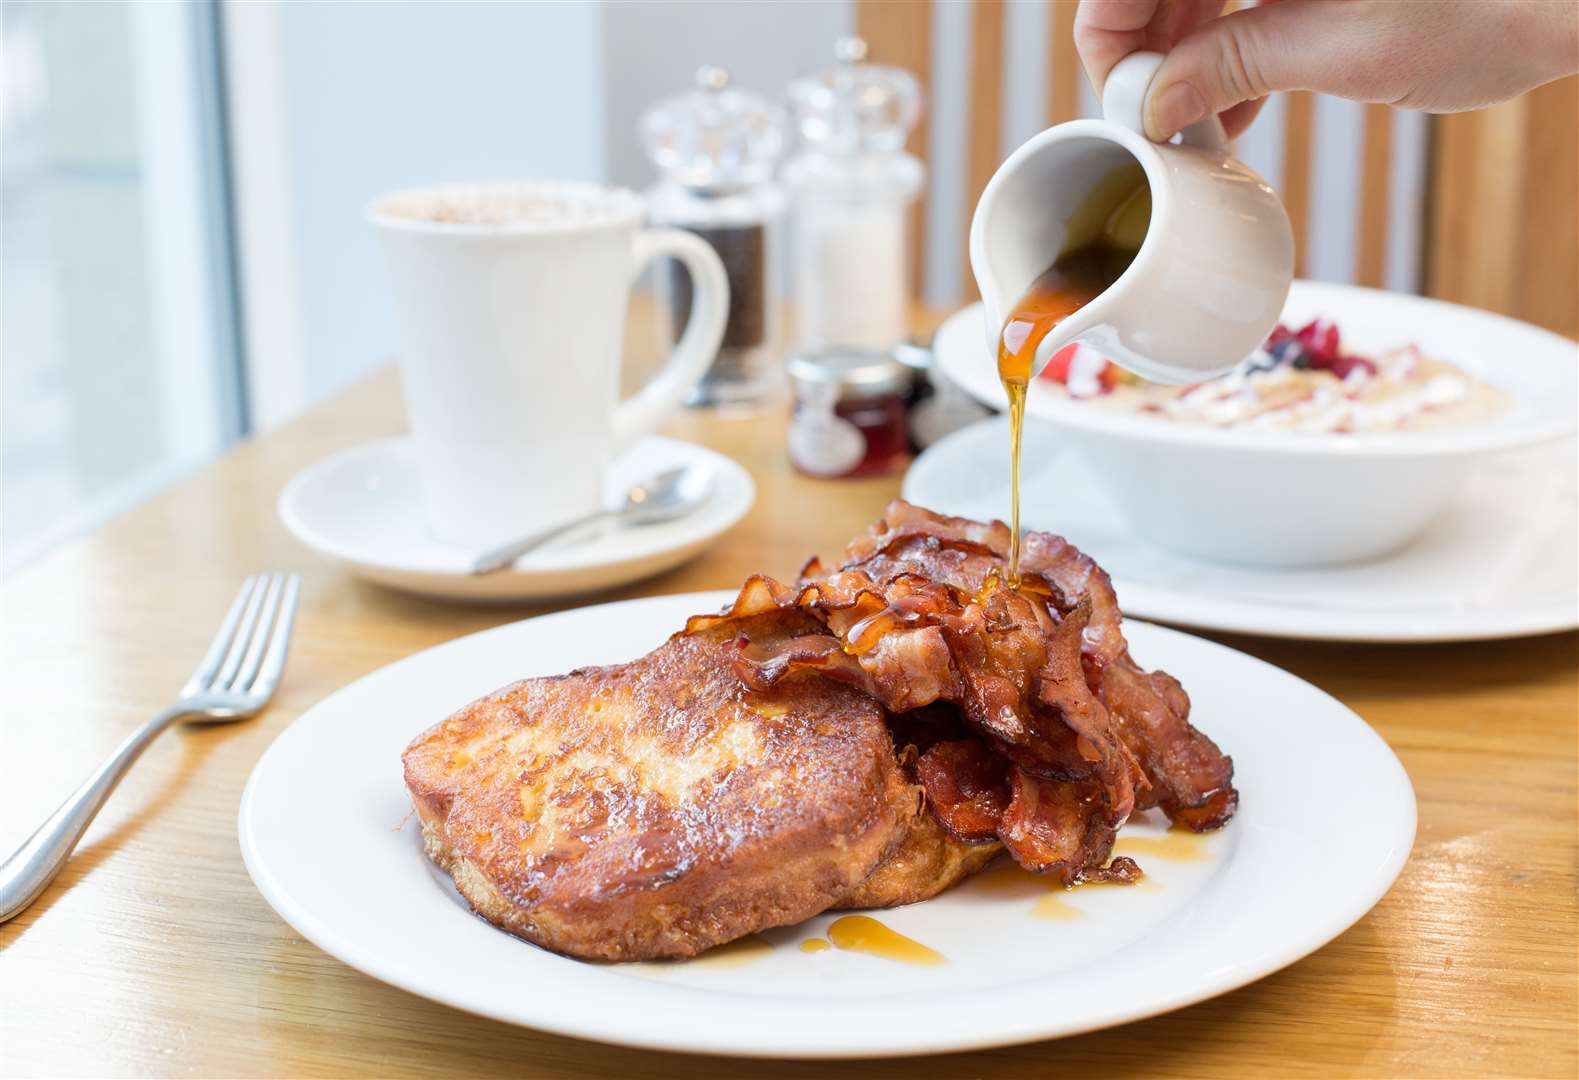 You can be sure of a scrumptious breakfast, lunch and treats at Café Artysans. Picture: Alison White.